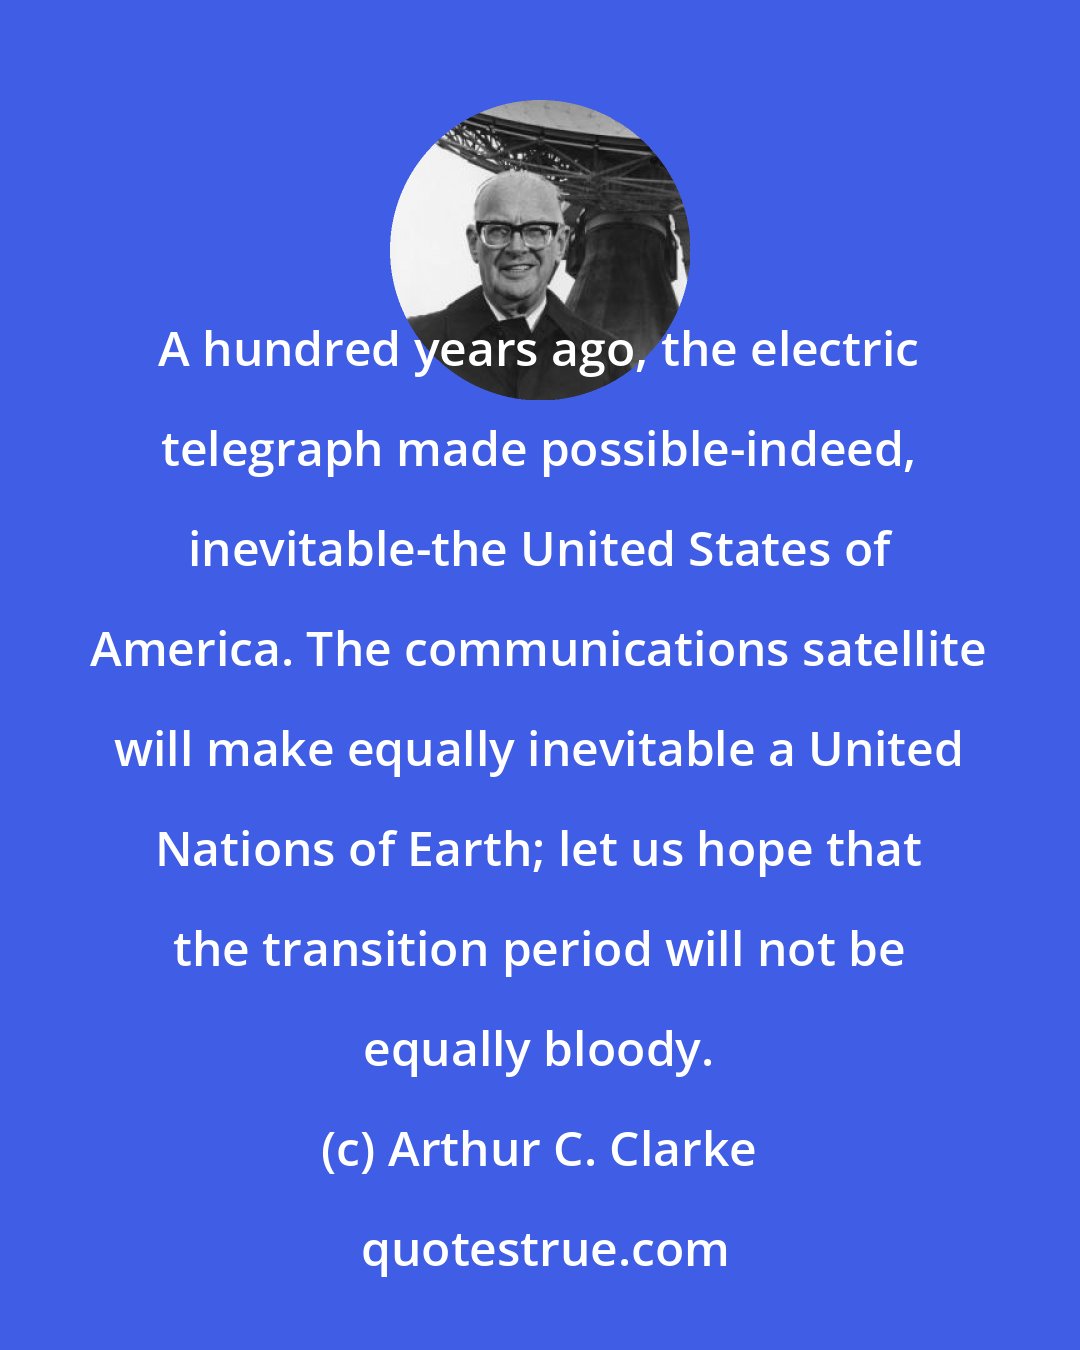 Arthur C. Clarke: A hundred years ago, the electric telegraph made possible-indeed, inevitable-the United States of America. The communications satellite will make equally inevitable a United Nations of Earth; let us hope that the transition period will not be equally bloody.